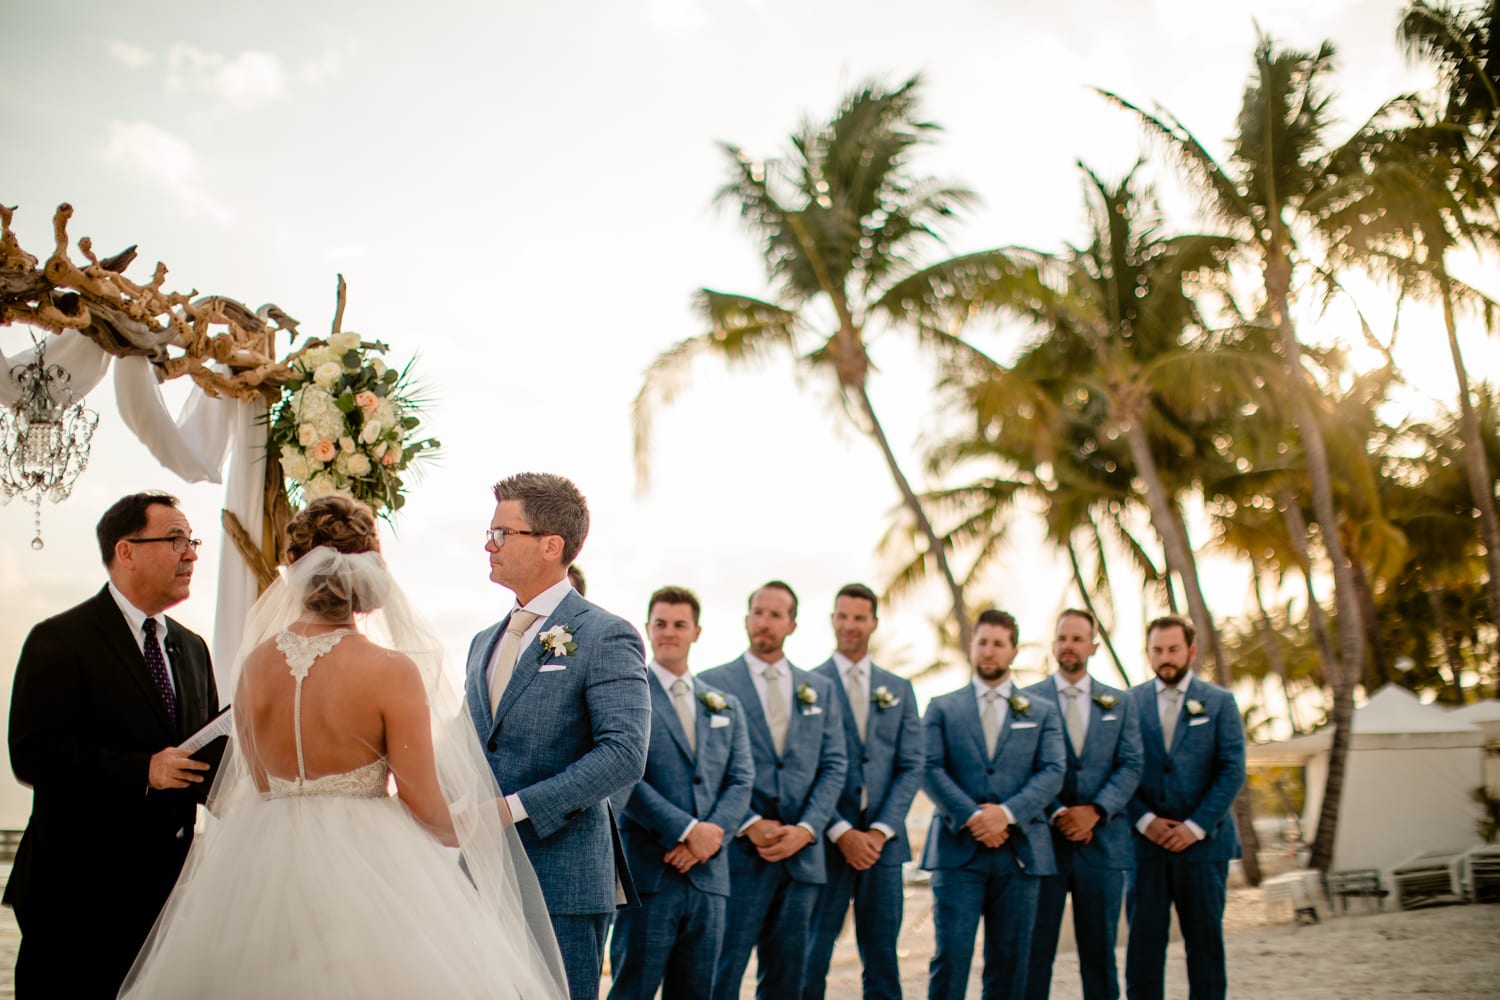 A Casa Marina wedding ceremony on the beach with bridesmaids and groomsmen.